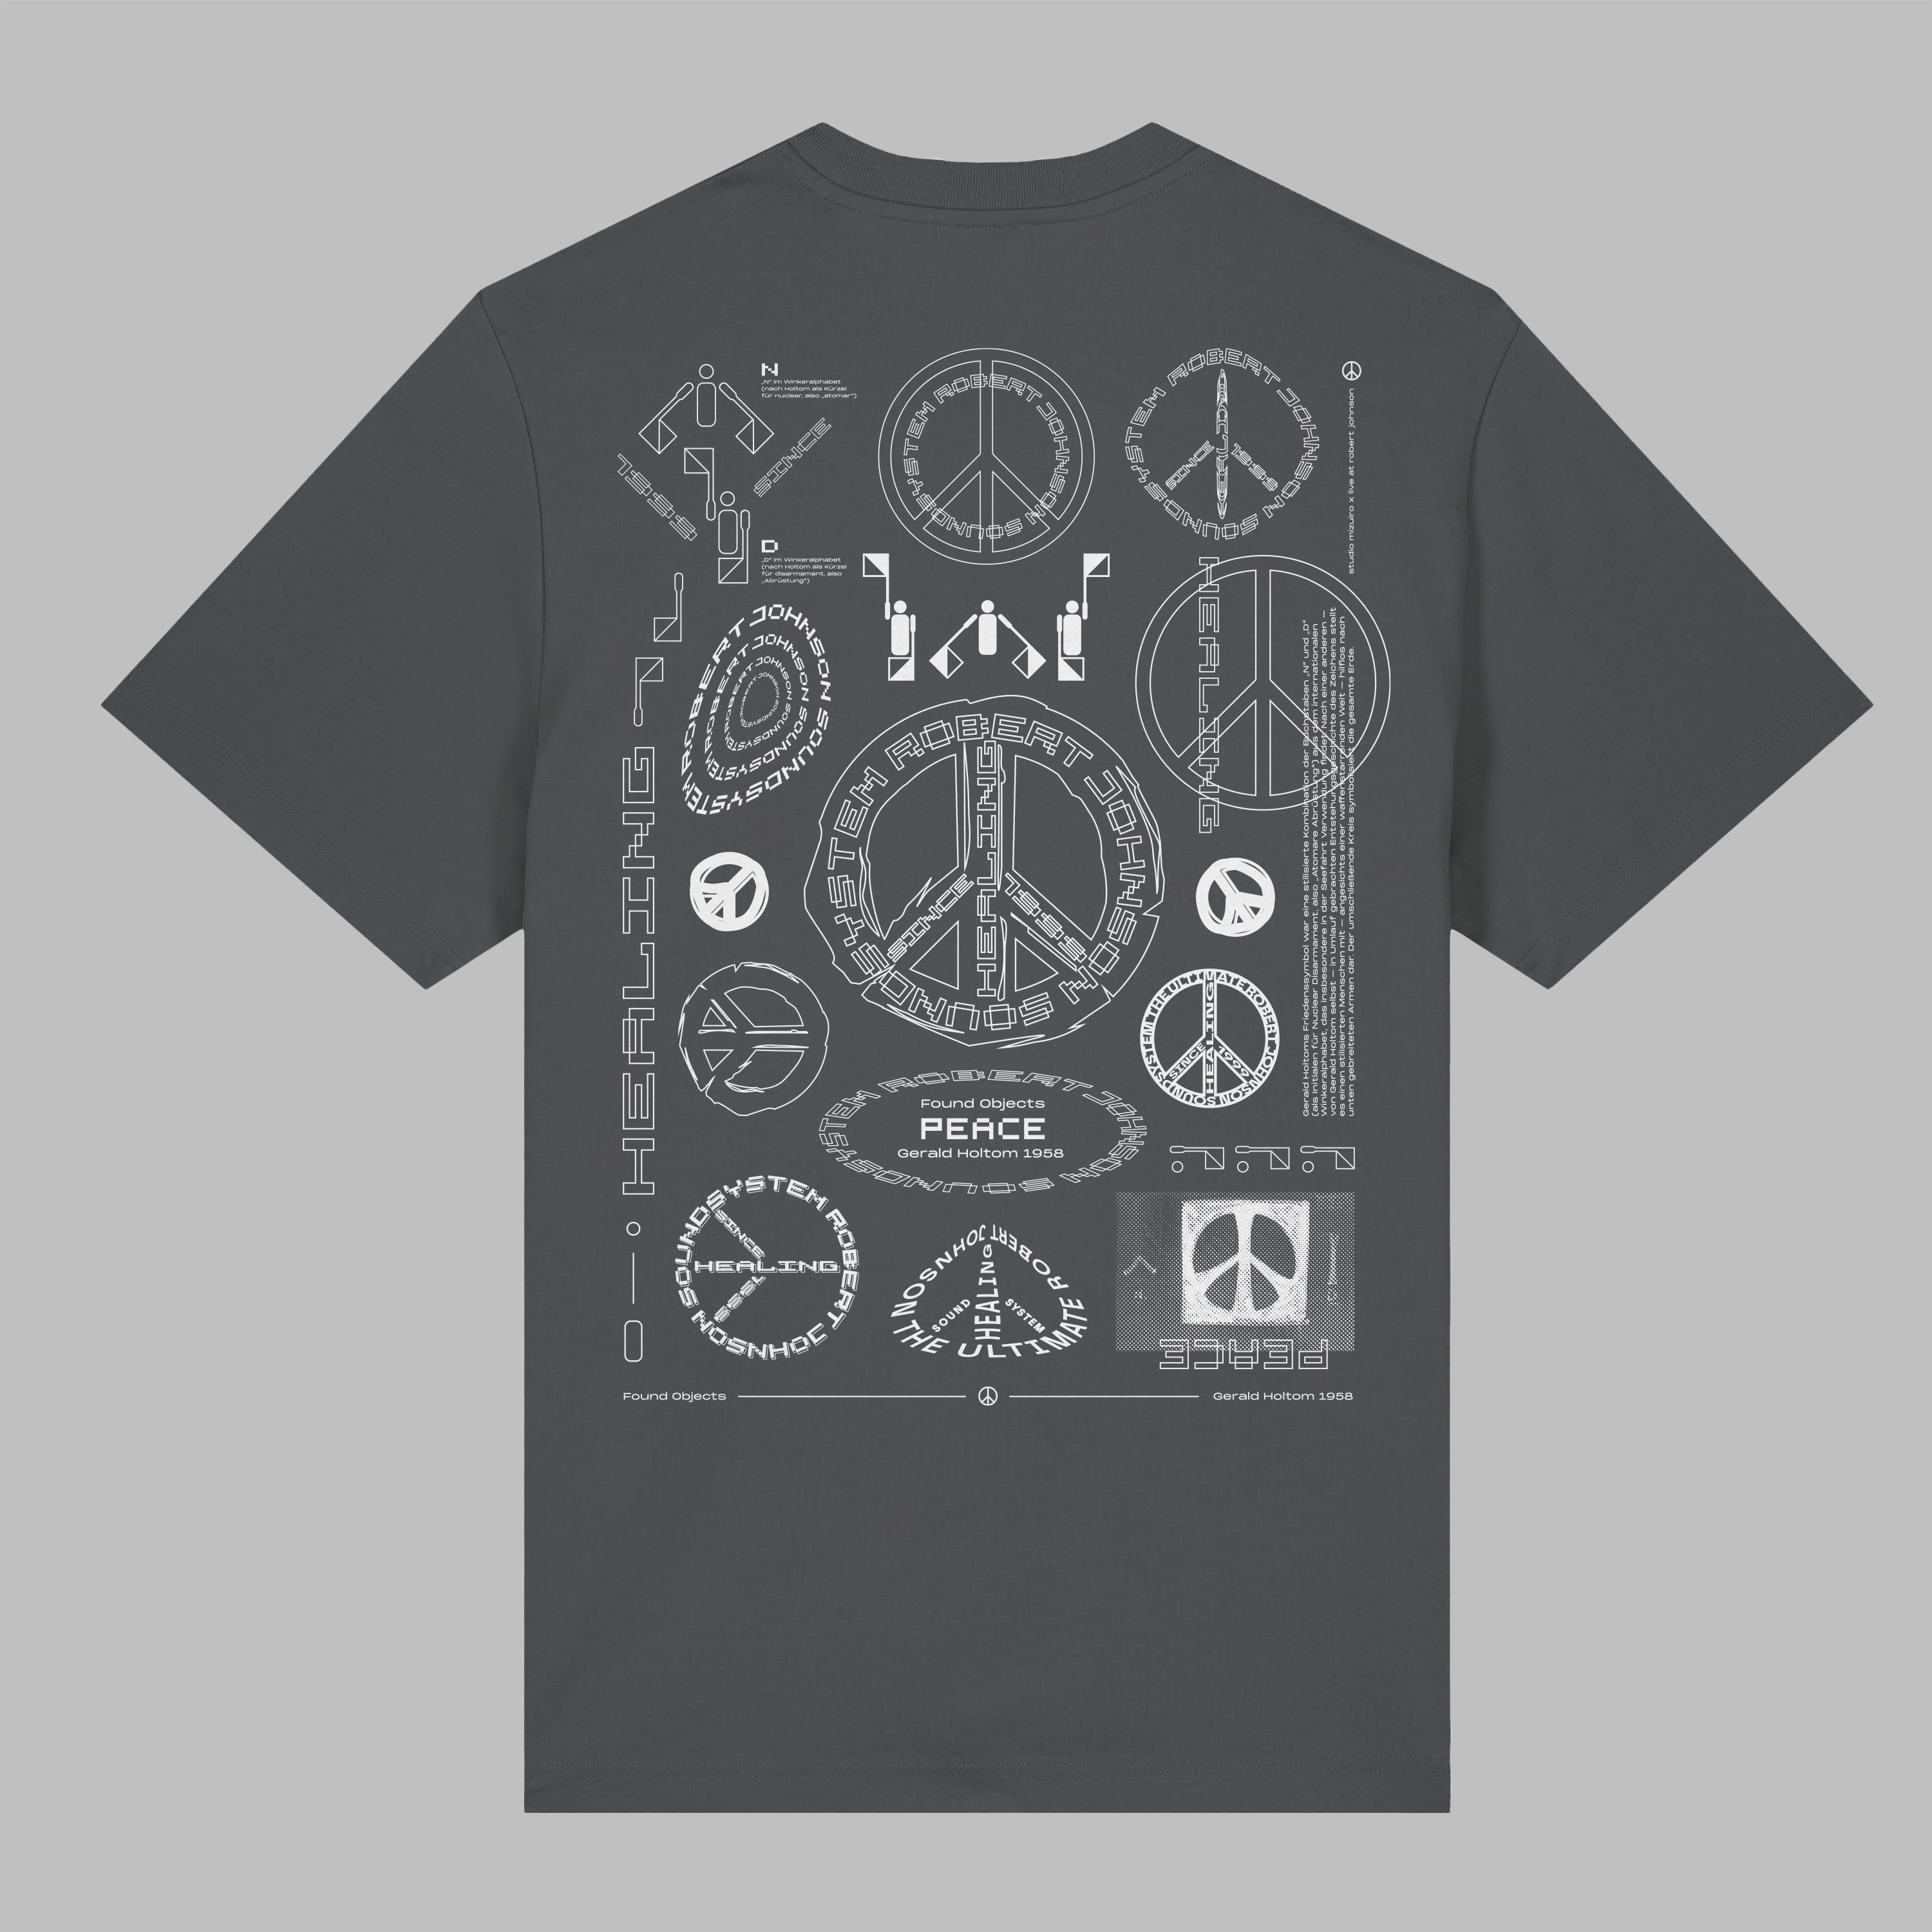 "Found Objects: Peace by Gerald Holtom!" - Shirt - ANTHRACITE